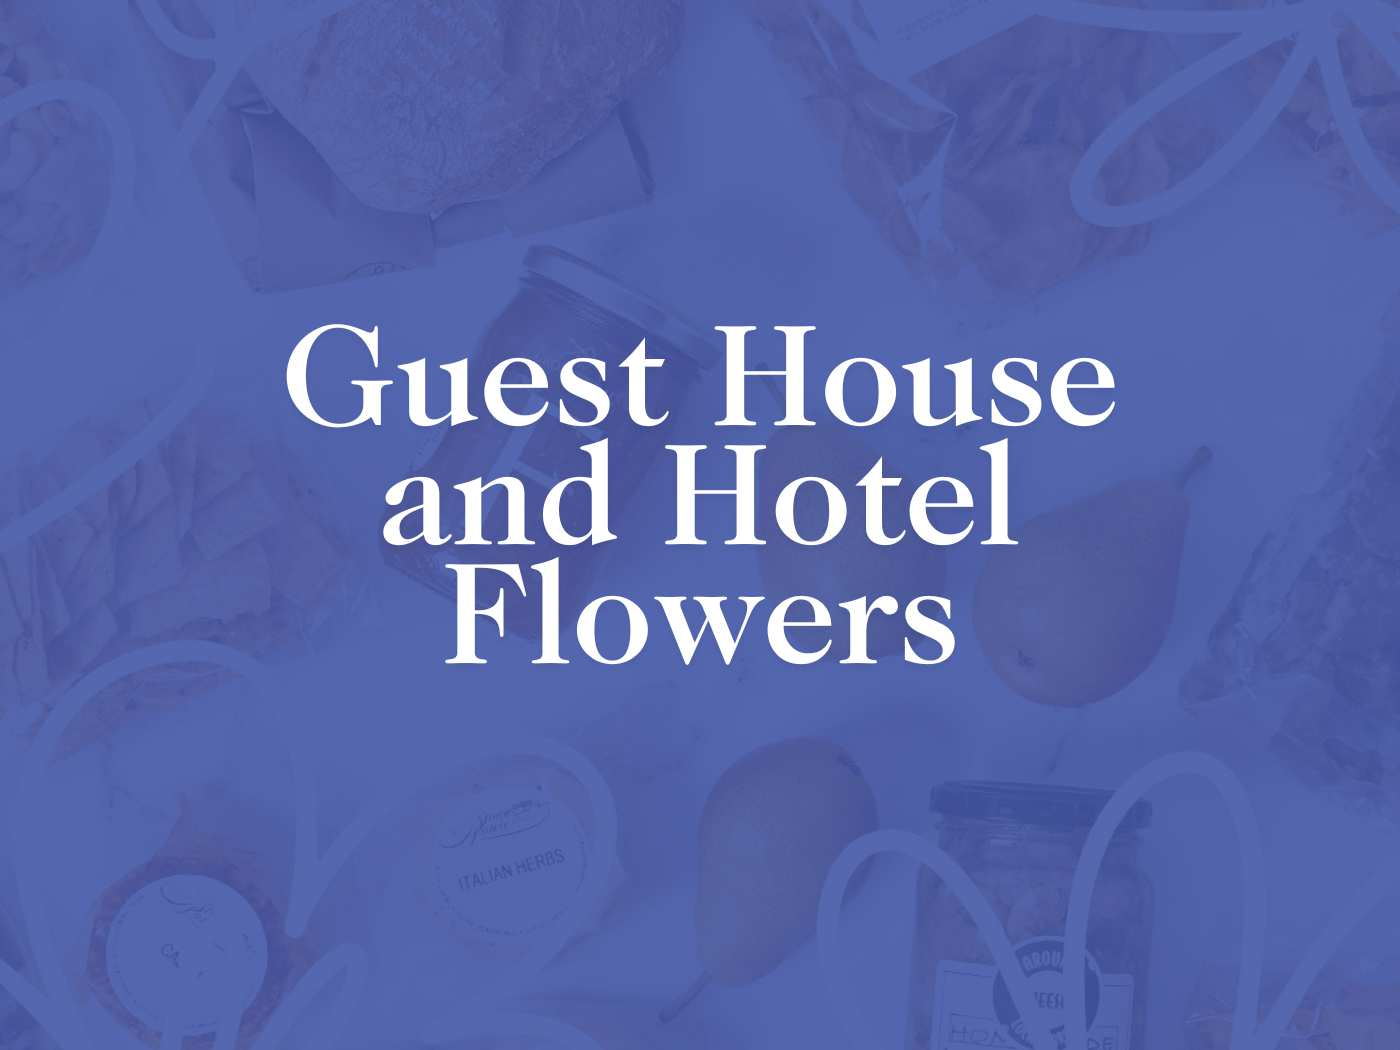 Promotional graphic for 'Guest House and Hotel Flowers,' featuring a stylish blue overlay with elegant, subtle motifs related to hospitality and floral arrangements. Ideal for marketing flower delivery services to guest houses and hotels. Fabulous Flowers and Gifts for Guest House and Hotel Flowers